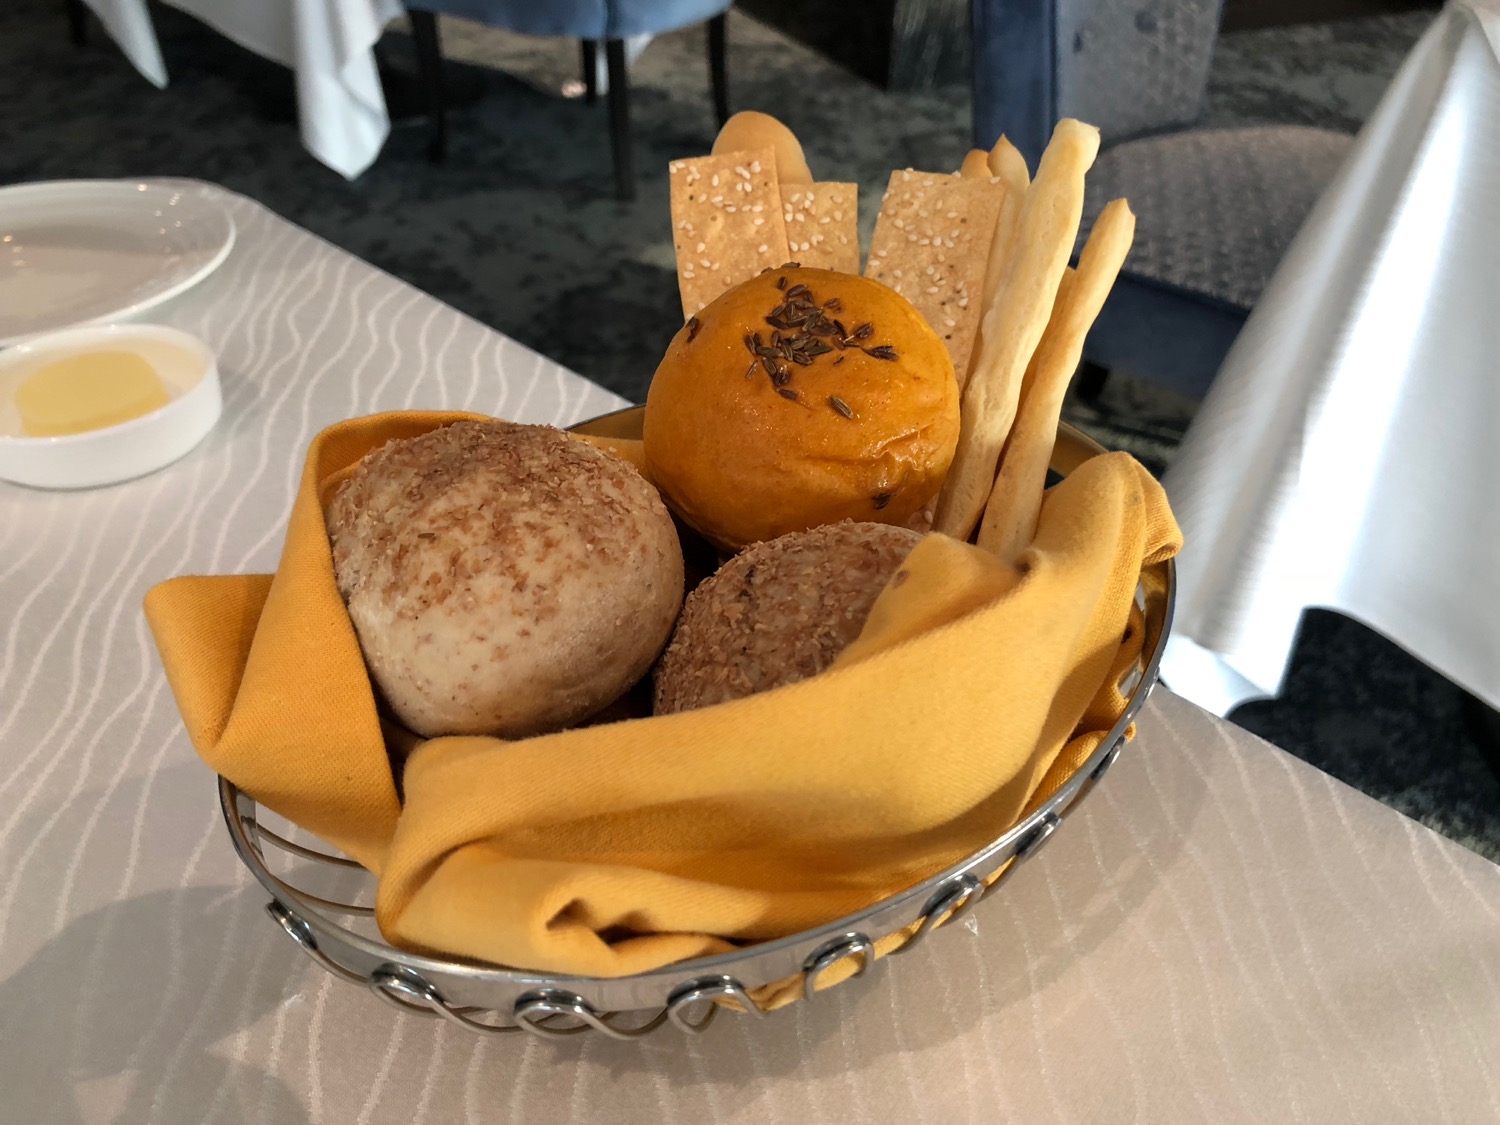 a basket of bread and rolls